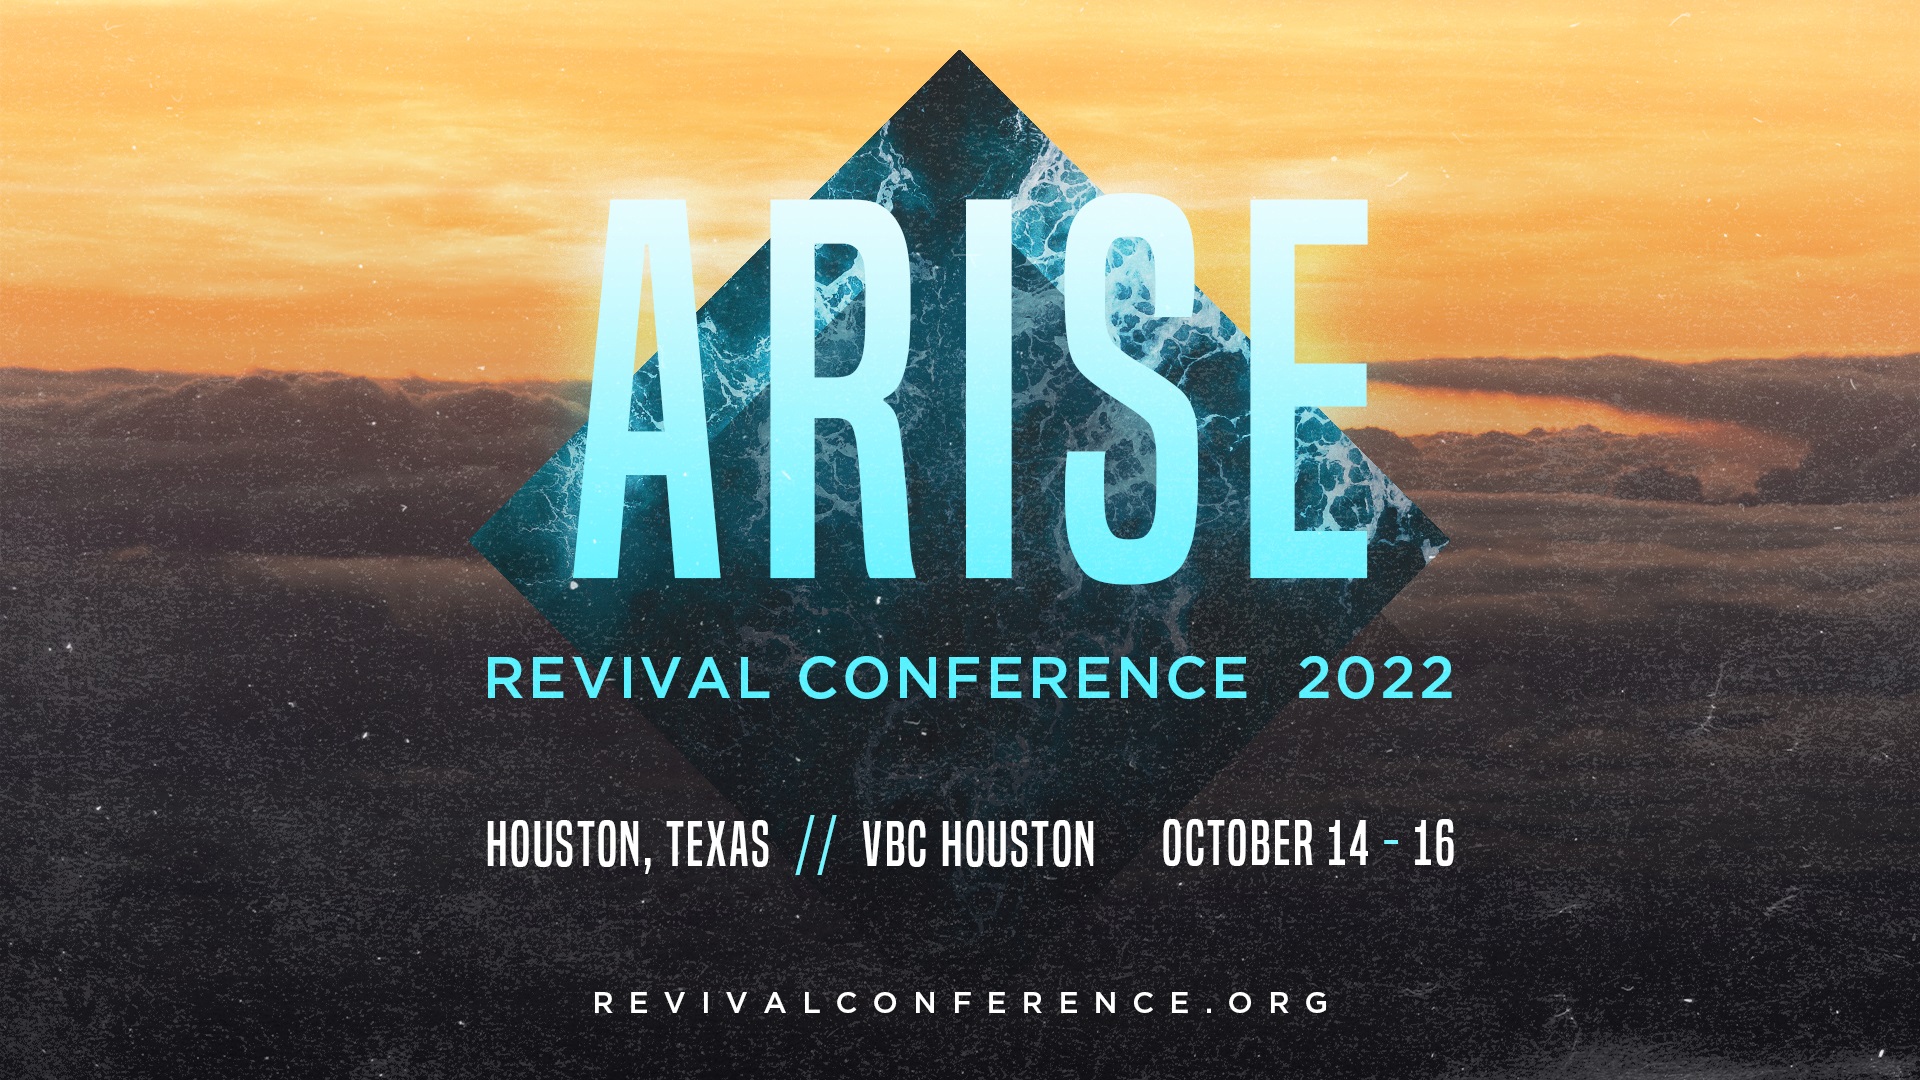 Revival Conference 2022